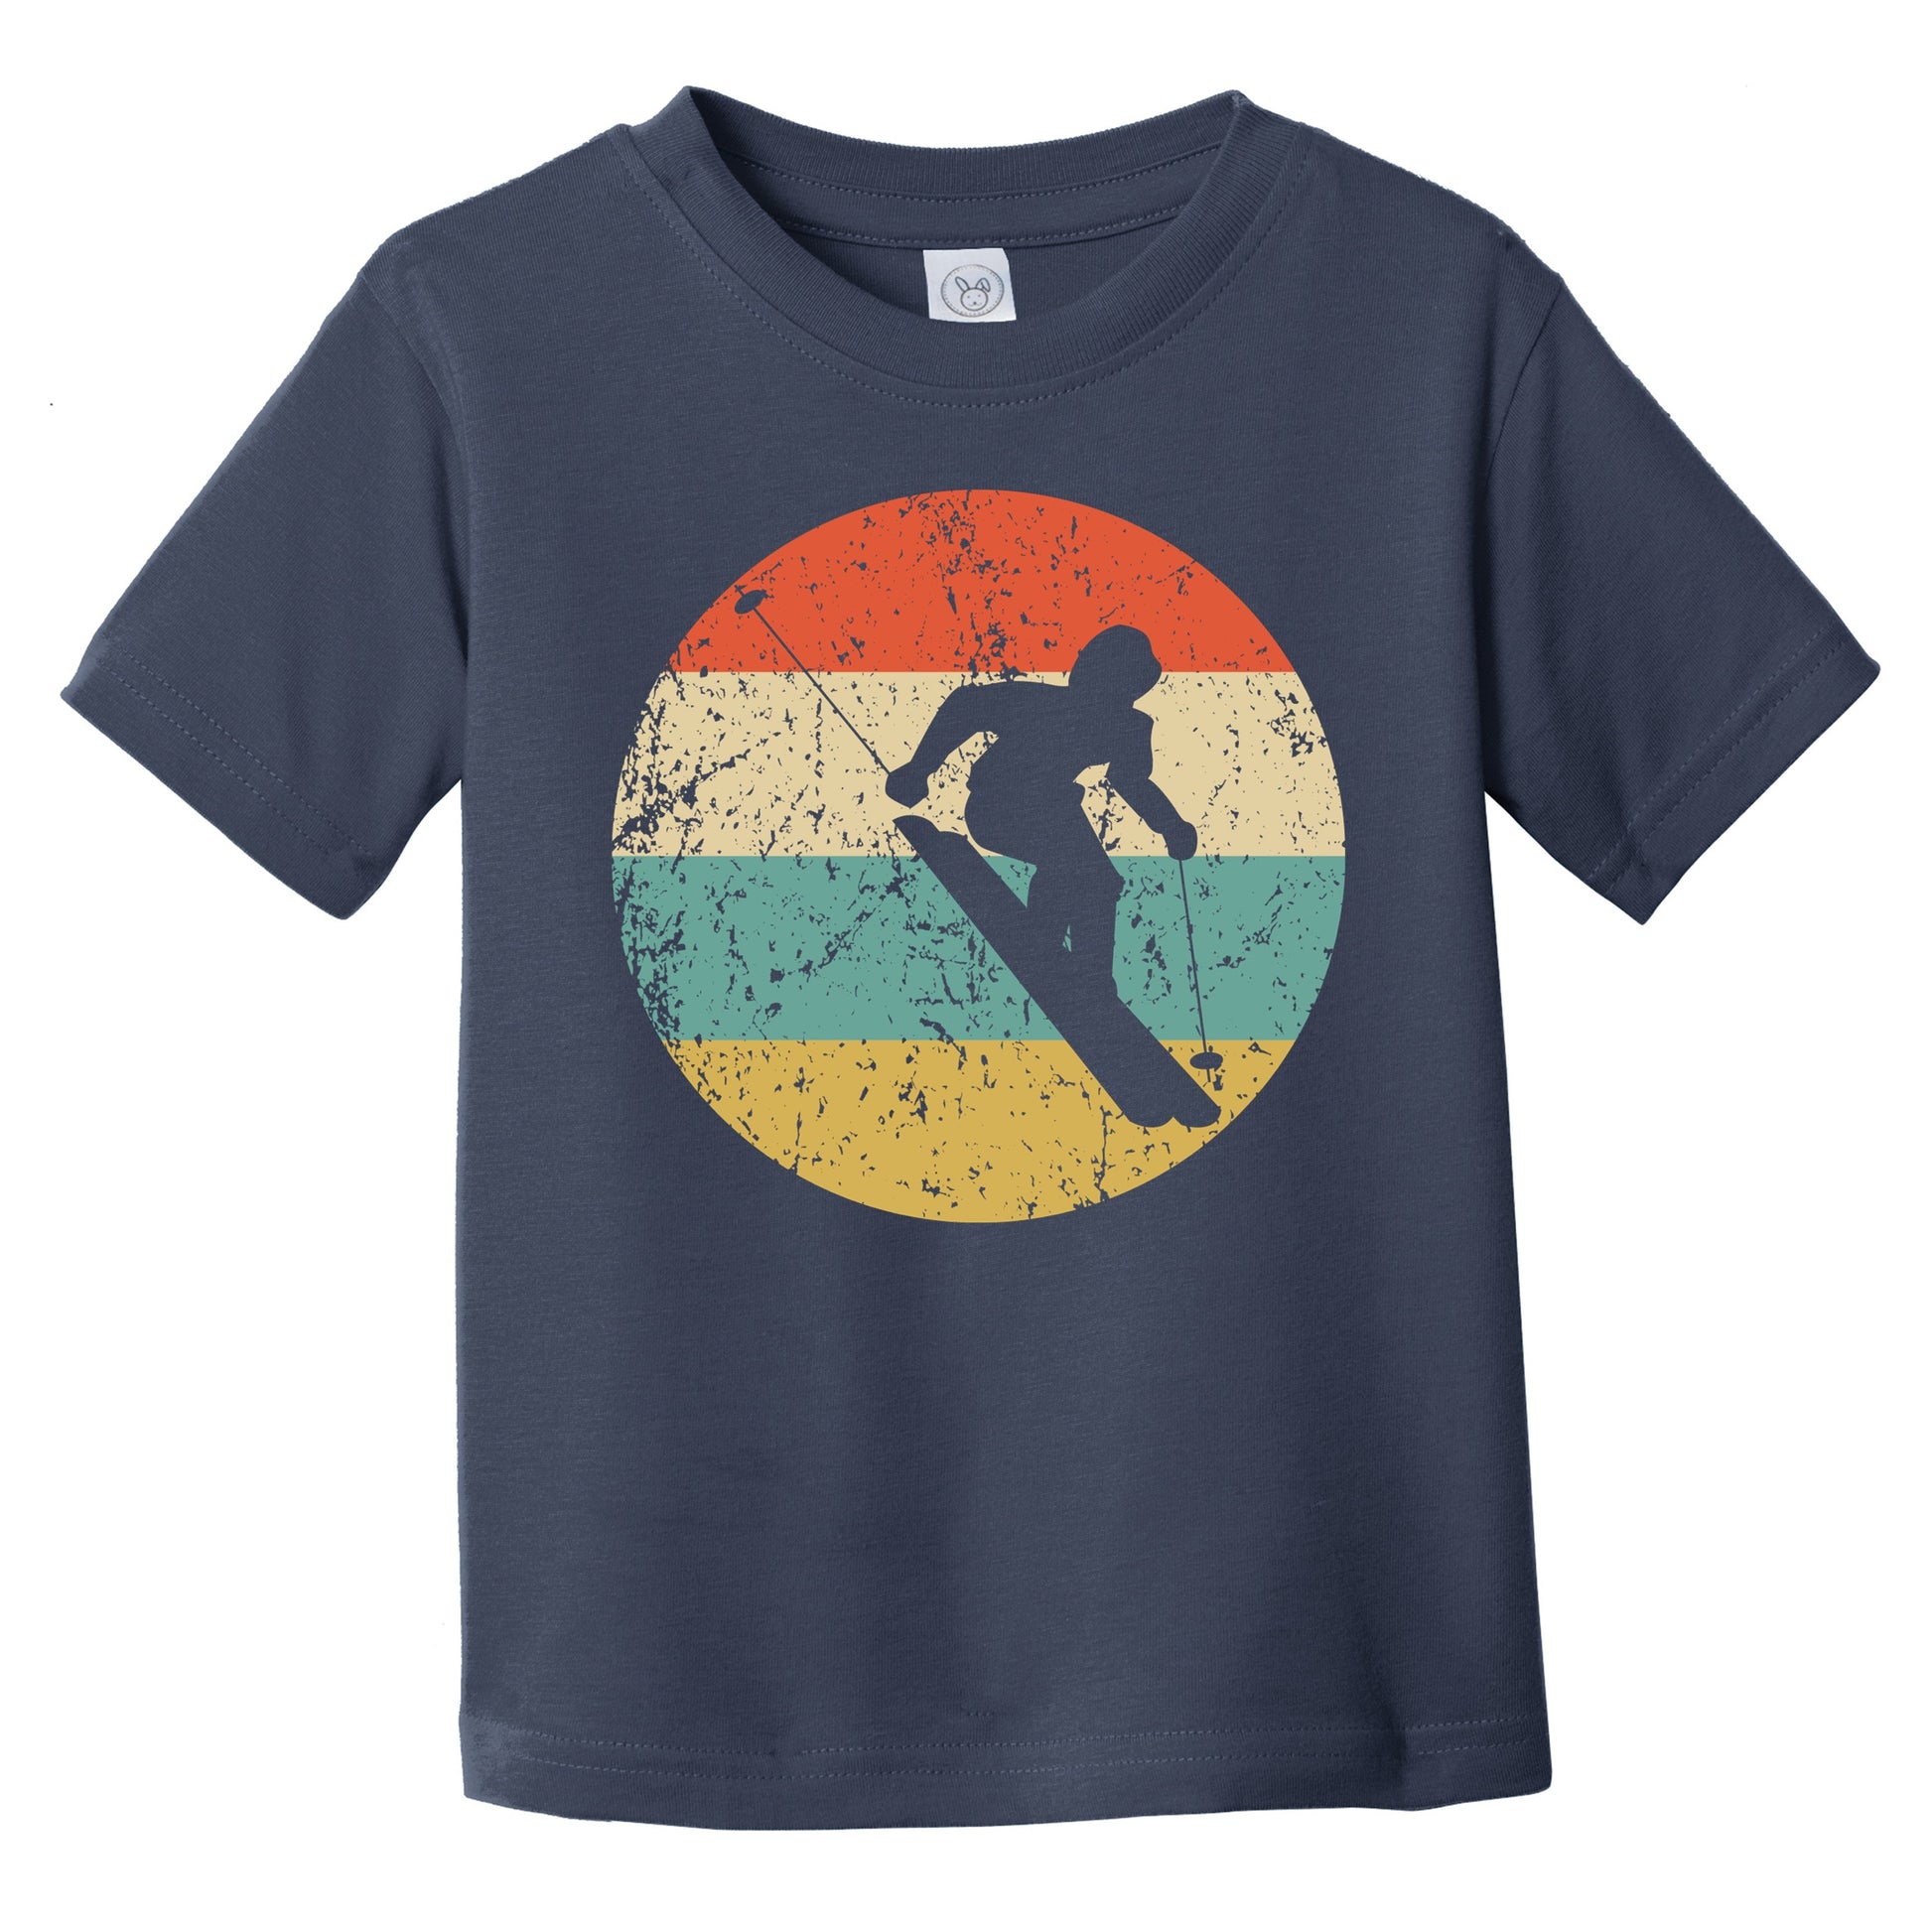 Downhill Skier Skiing Silhouette Retro Winter Sports Infant Toddler T-Shirt